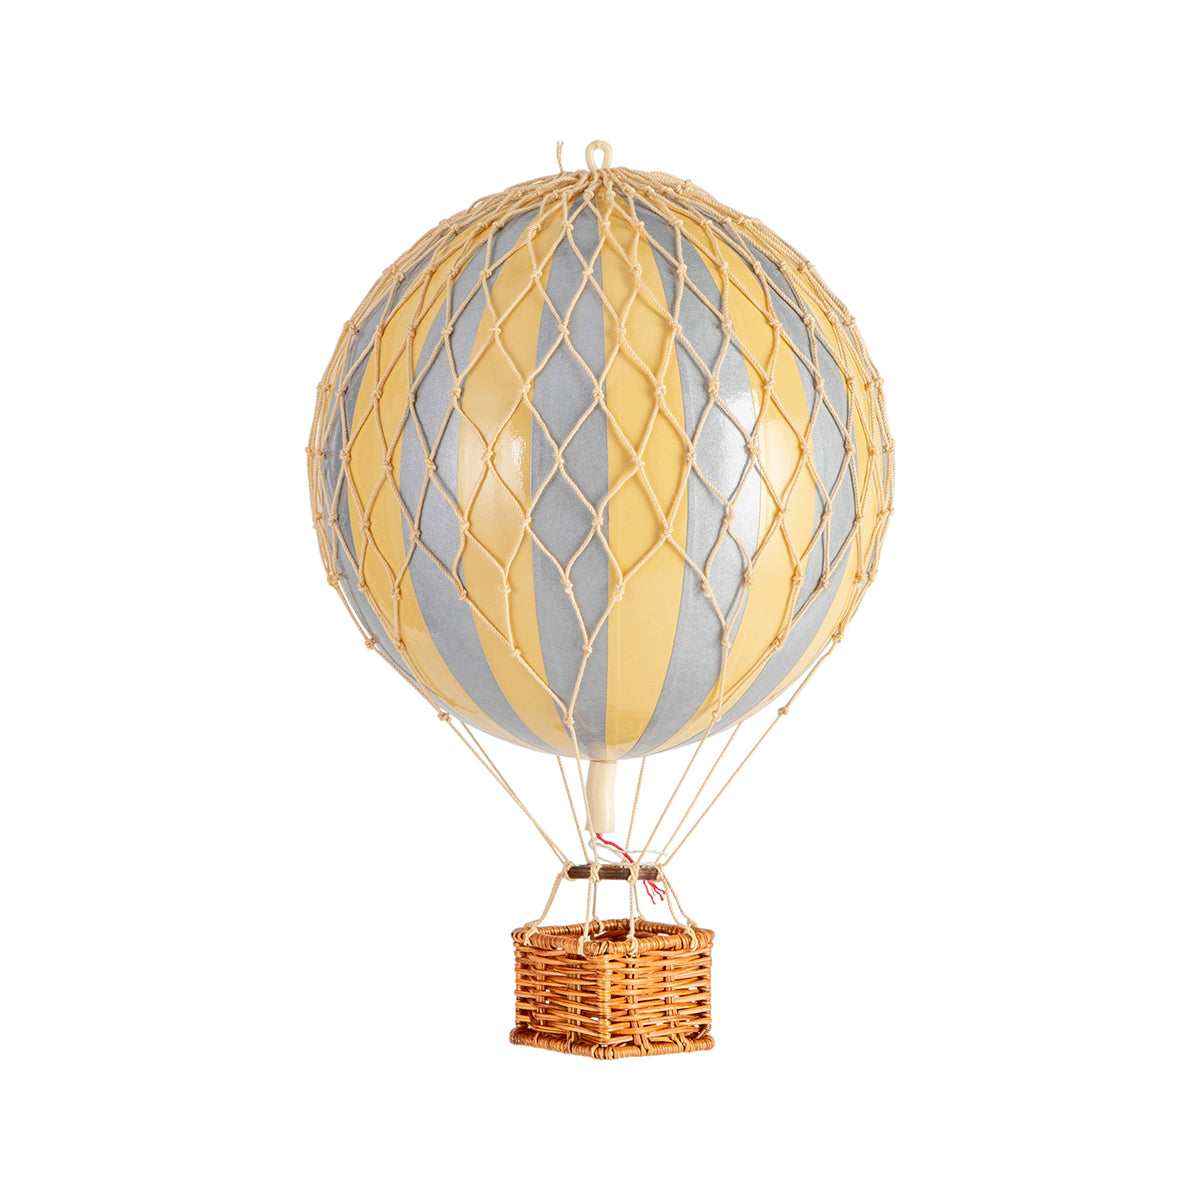 A Wonderen Small Hot Air Balloon - Travels Light with a basket on it, exploring the wonders of science.